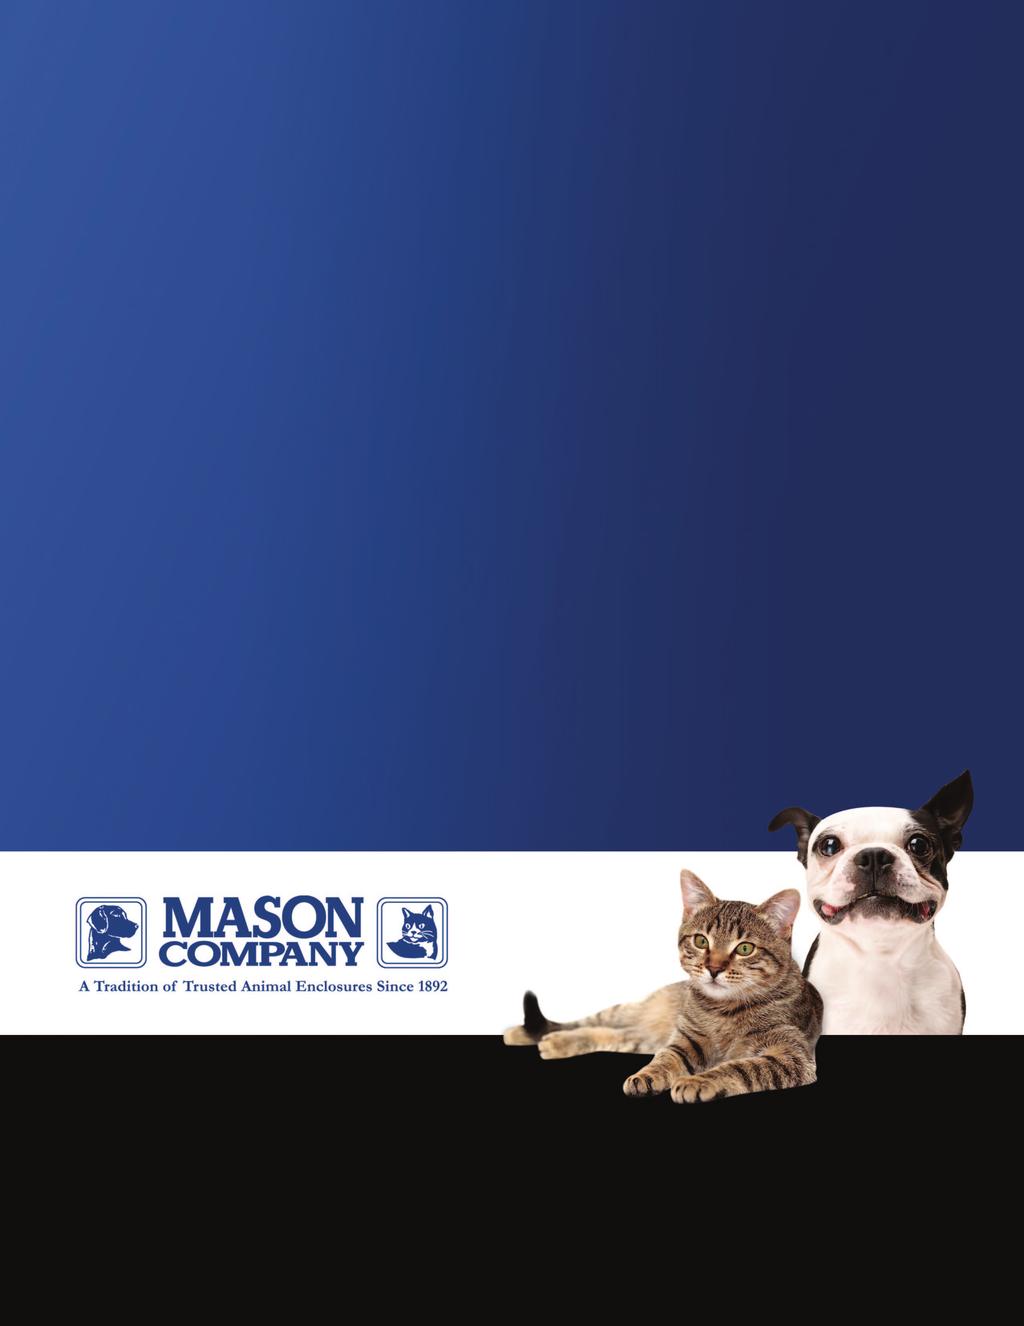 With more than 120 years of experience in designing the finest animal enclosures in the world, Mason Company has more experience in animal enclosure design than anyone else in the industry.